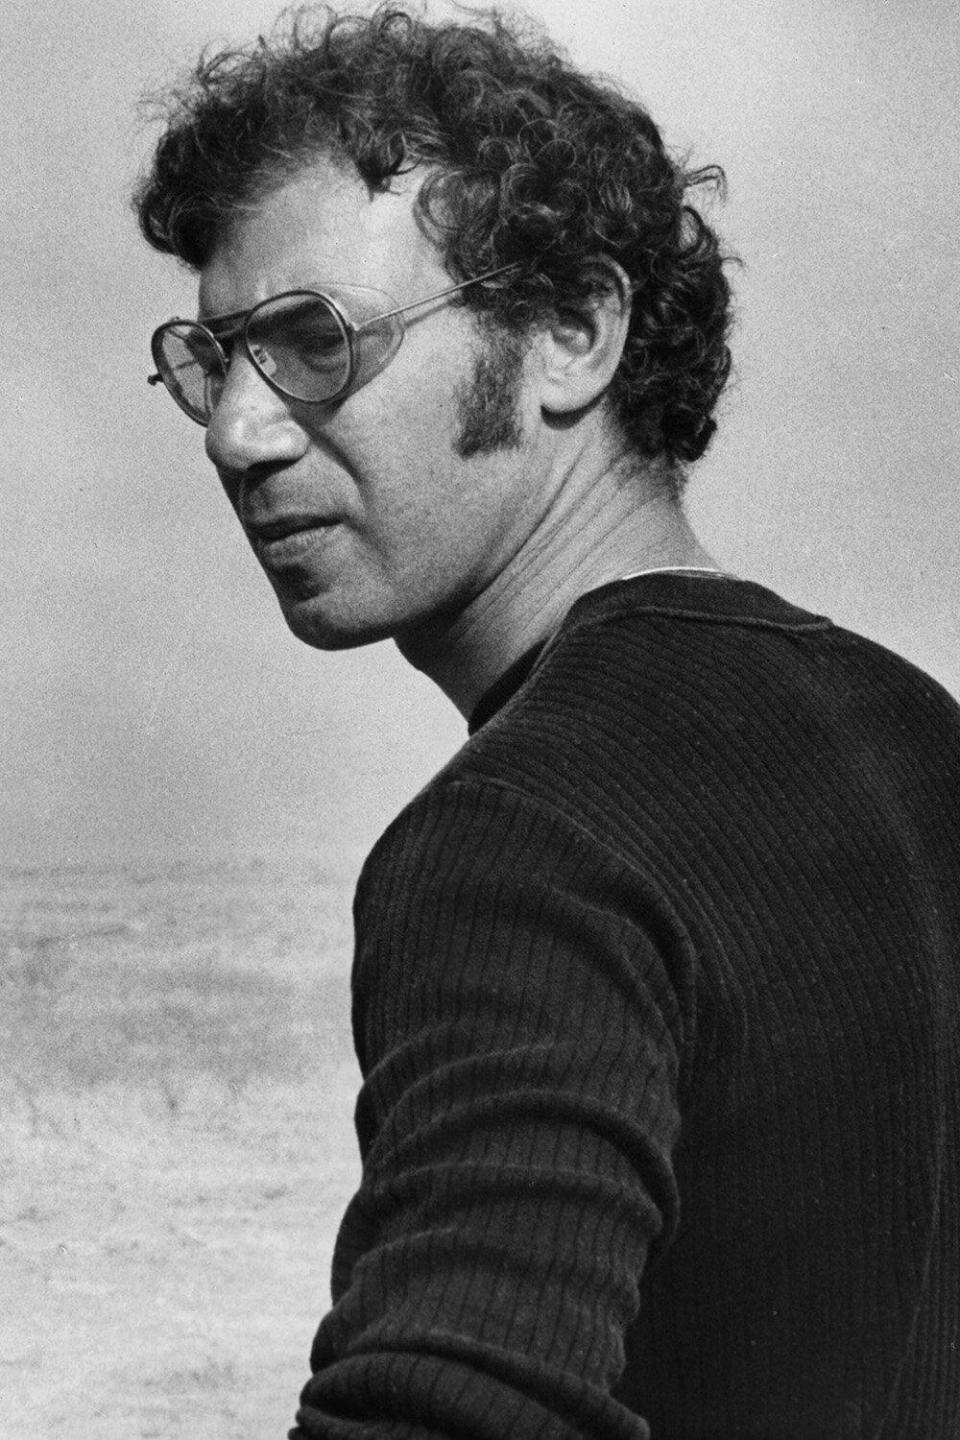 Director Bob Rafelson in a publicity portrait from the film 'Five Easy Pieces', 1970. (Photo by Columbia Pictures/Getty Images)